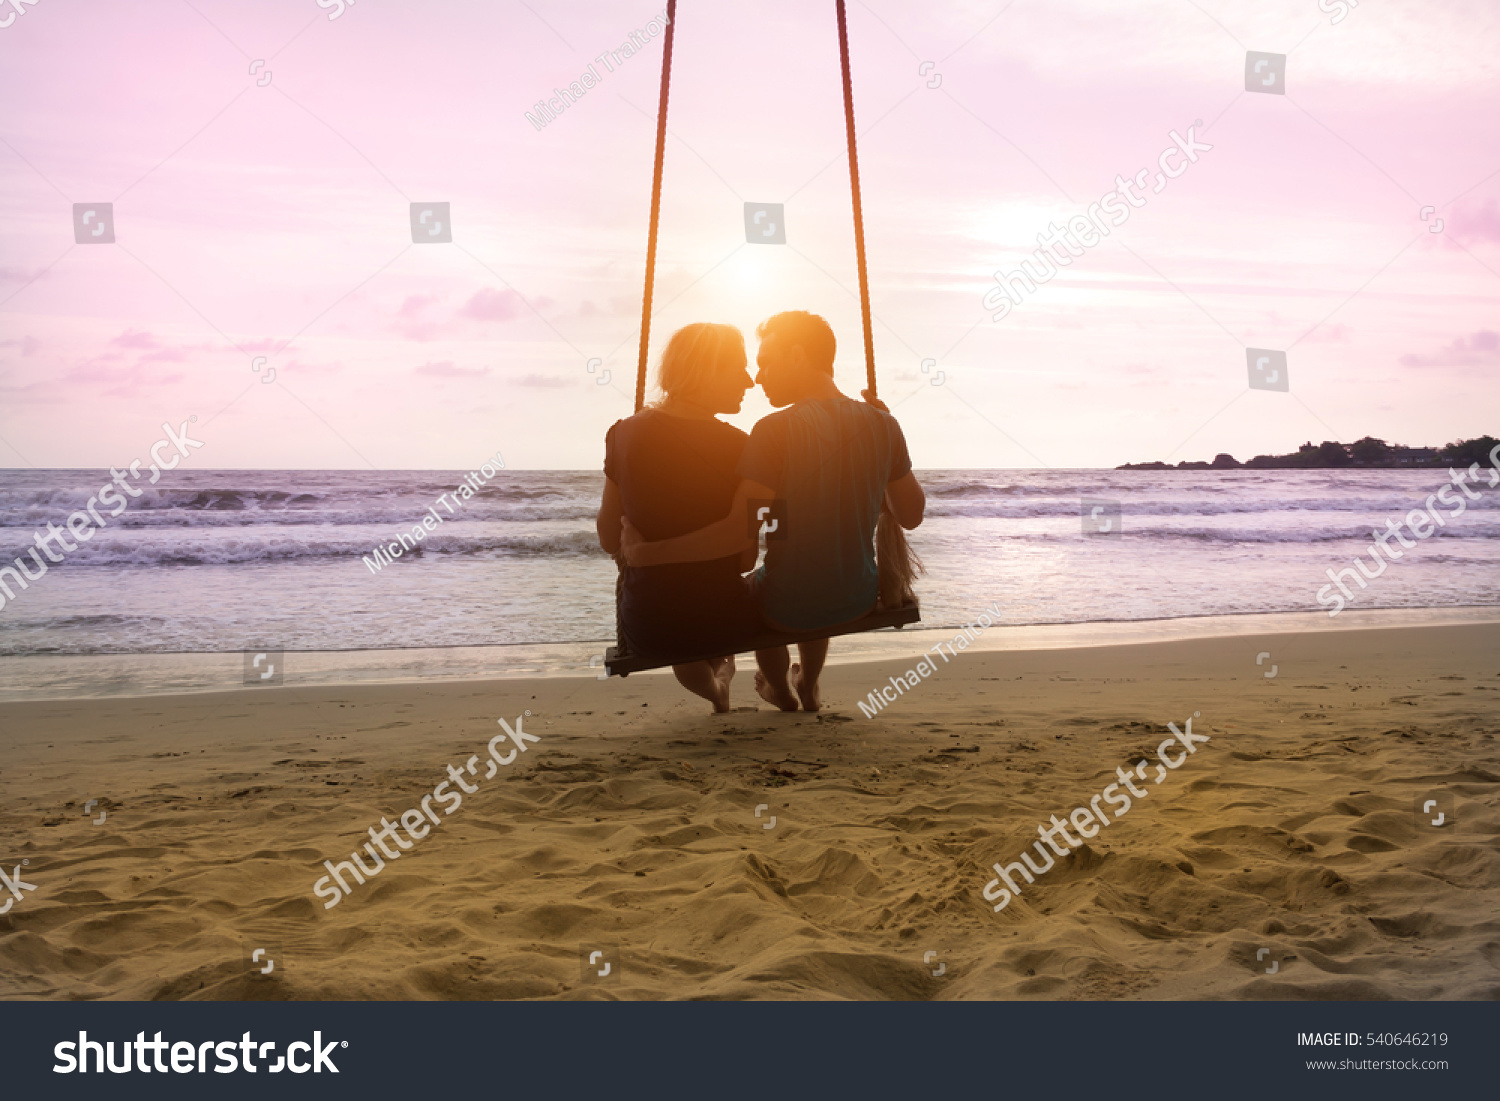 Romantic couple is sitting and kissing on sea beach on rope swing . Family vacation on honeymoon. Love and relationship #540646219